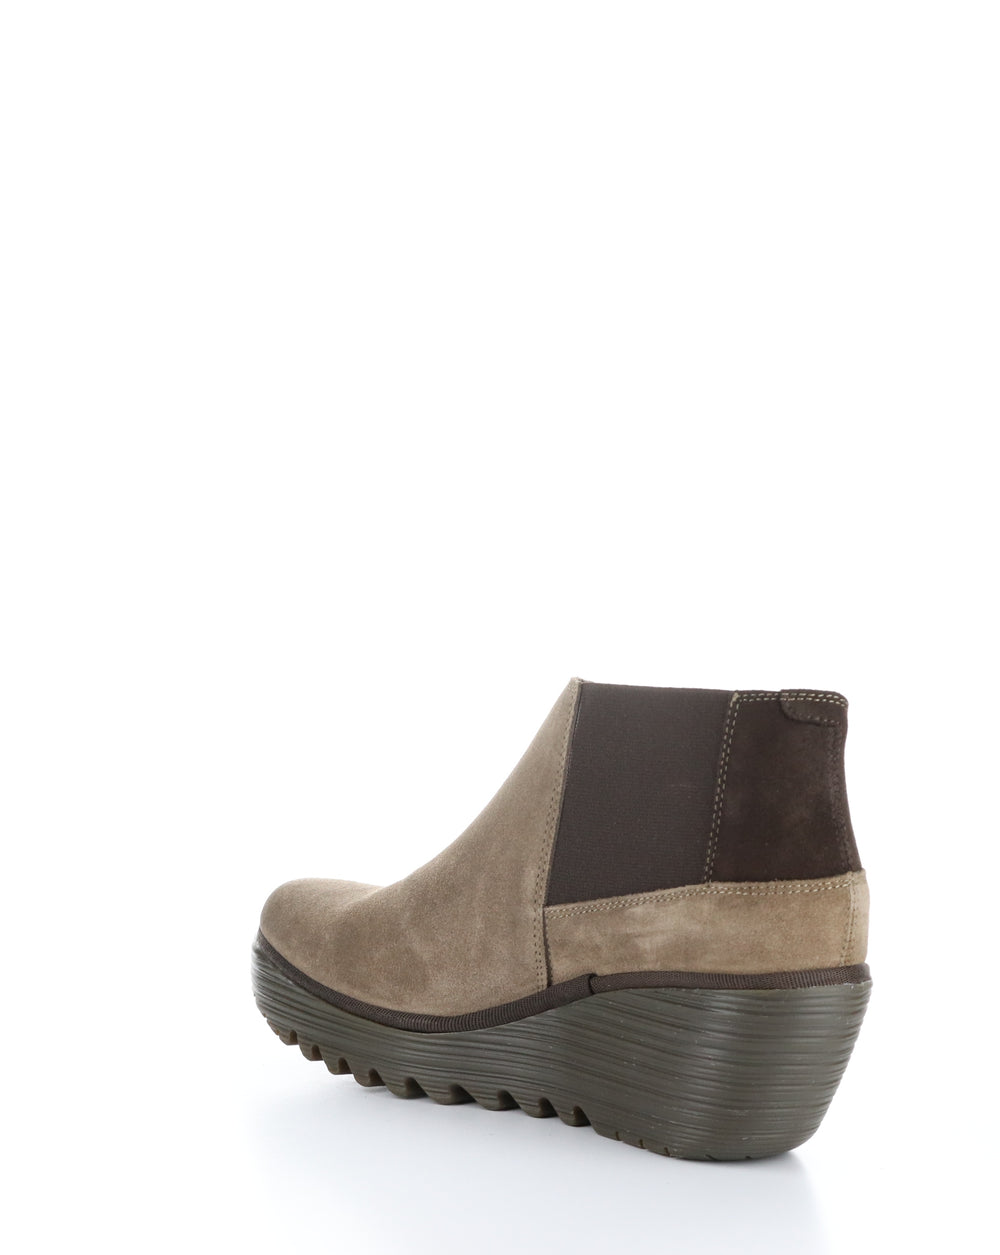 YEGO400FLY 006 TAUPE/EXPRESSO Elasticated Boots